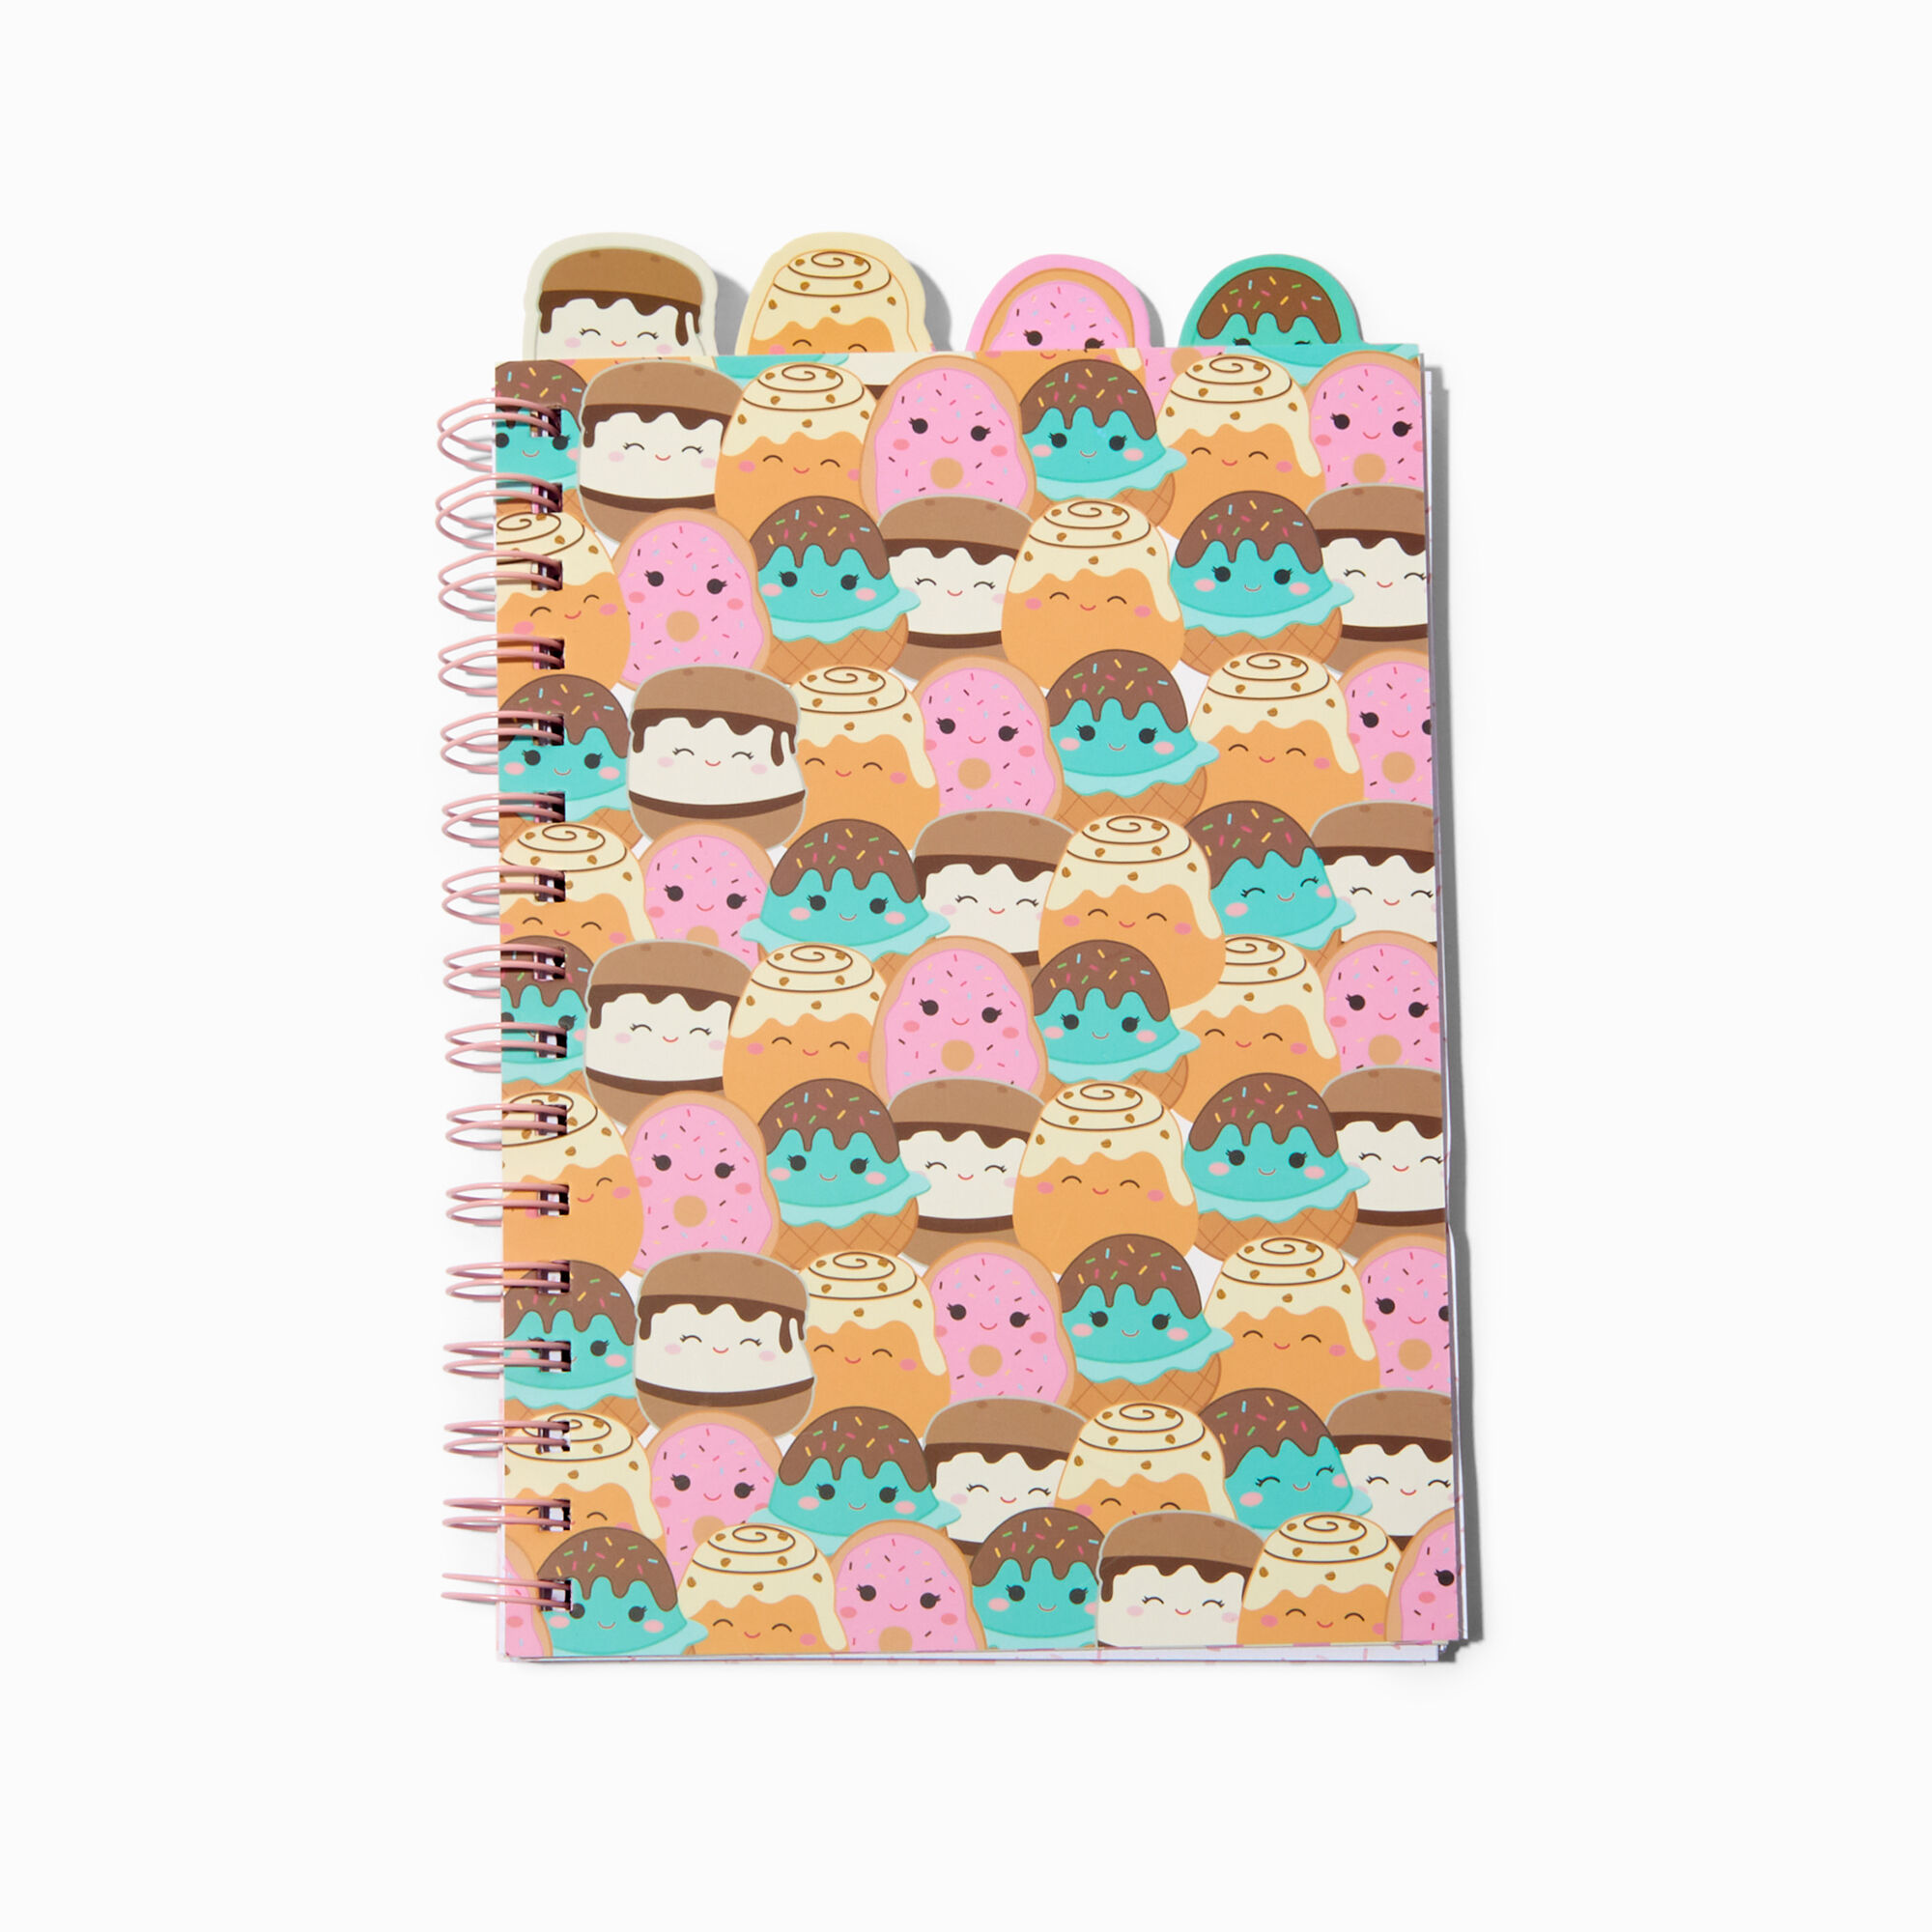 View Claires Squishmallows Notebook information